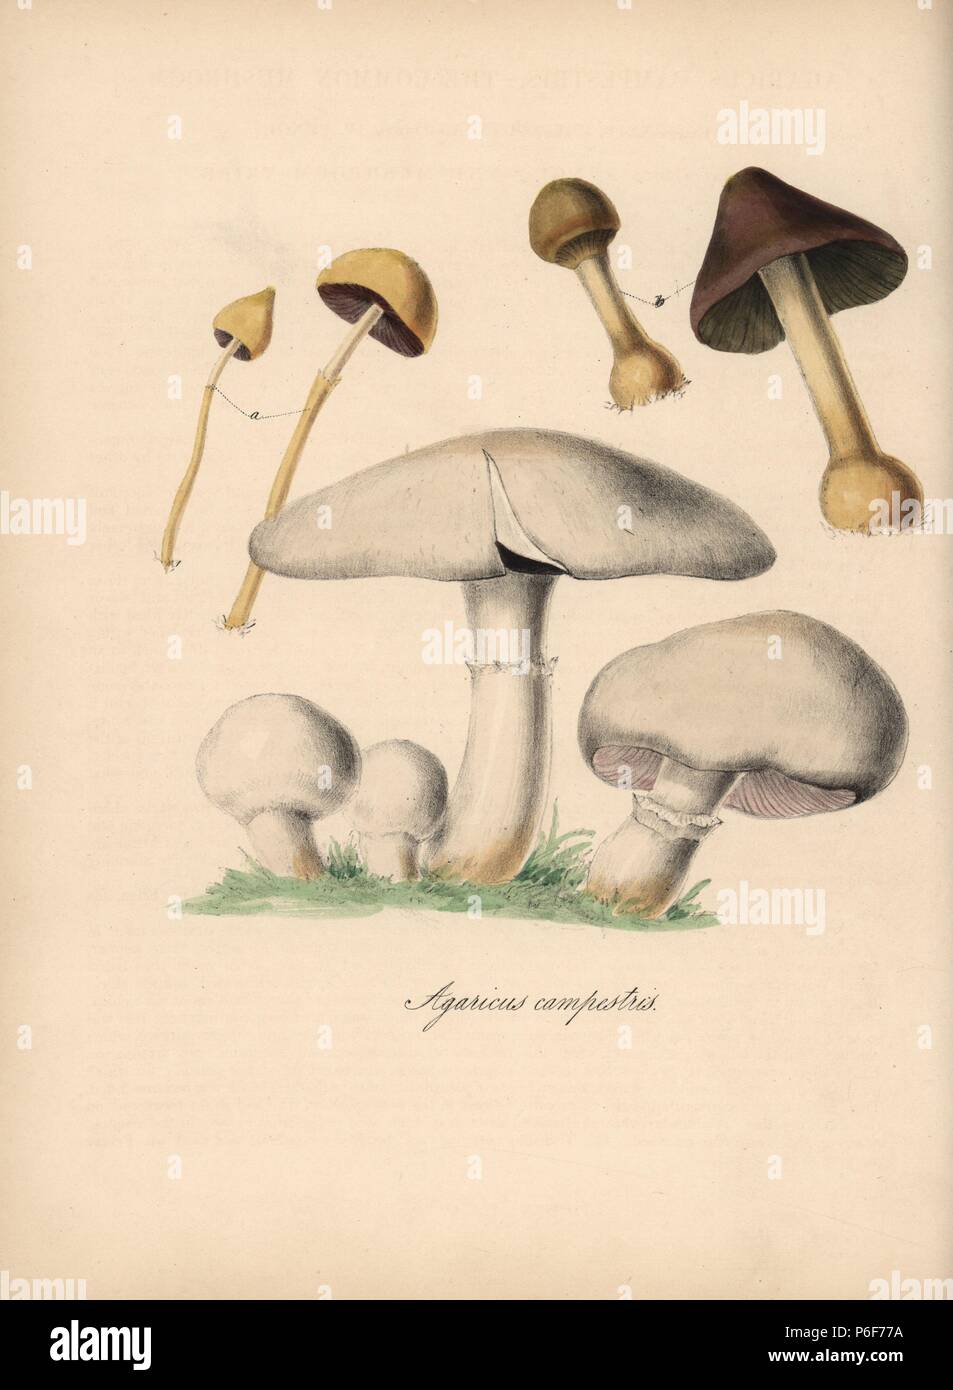 Field mushroom, Agaricus campestris. Handcoloured zincograph by C. Chabot drawn by Miss M. A. Burnett from her 'Plantae Utiliores: or Illustrations of Useful Plants,' Whittaker, London, 1842. Miss Burnett drew the botanical illustrations, but the text was chiefly by her late brother, British botanist Gilbert Thomas Burnett (1800-1835). Stock Photo